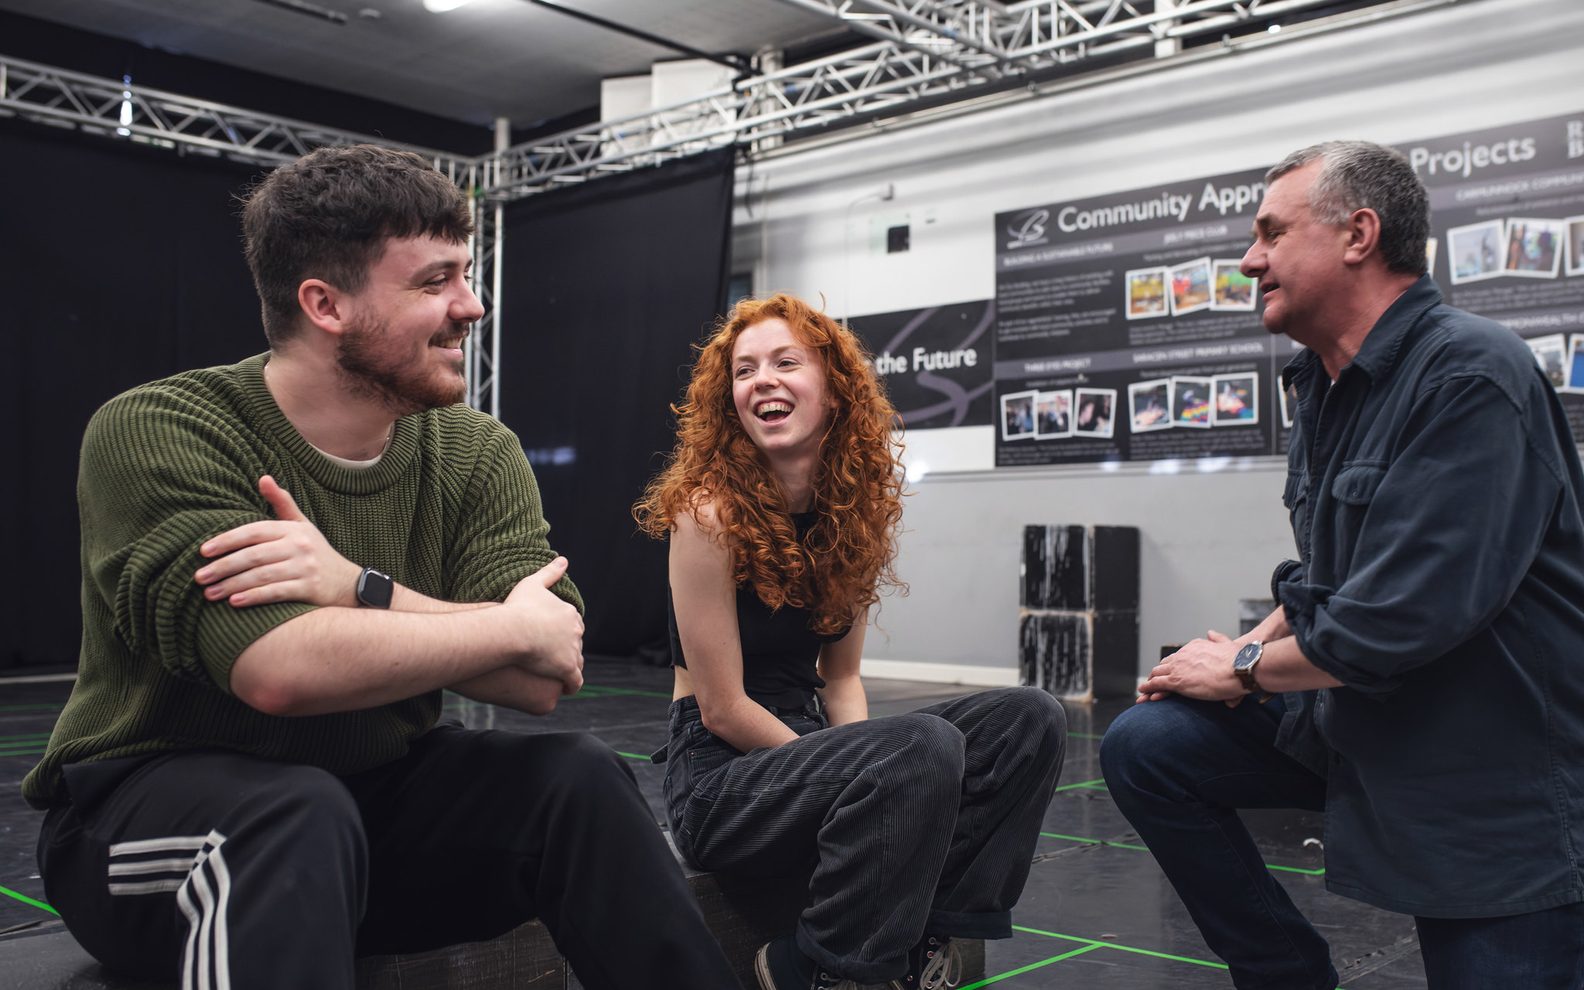 Three people rehearsing for a show. They are smiling.